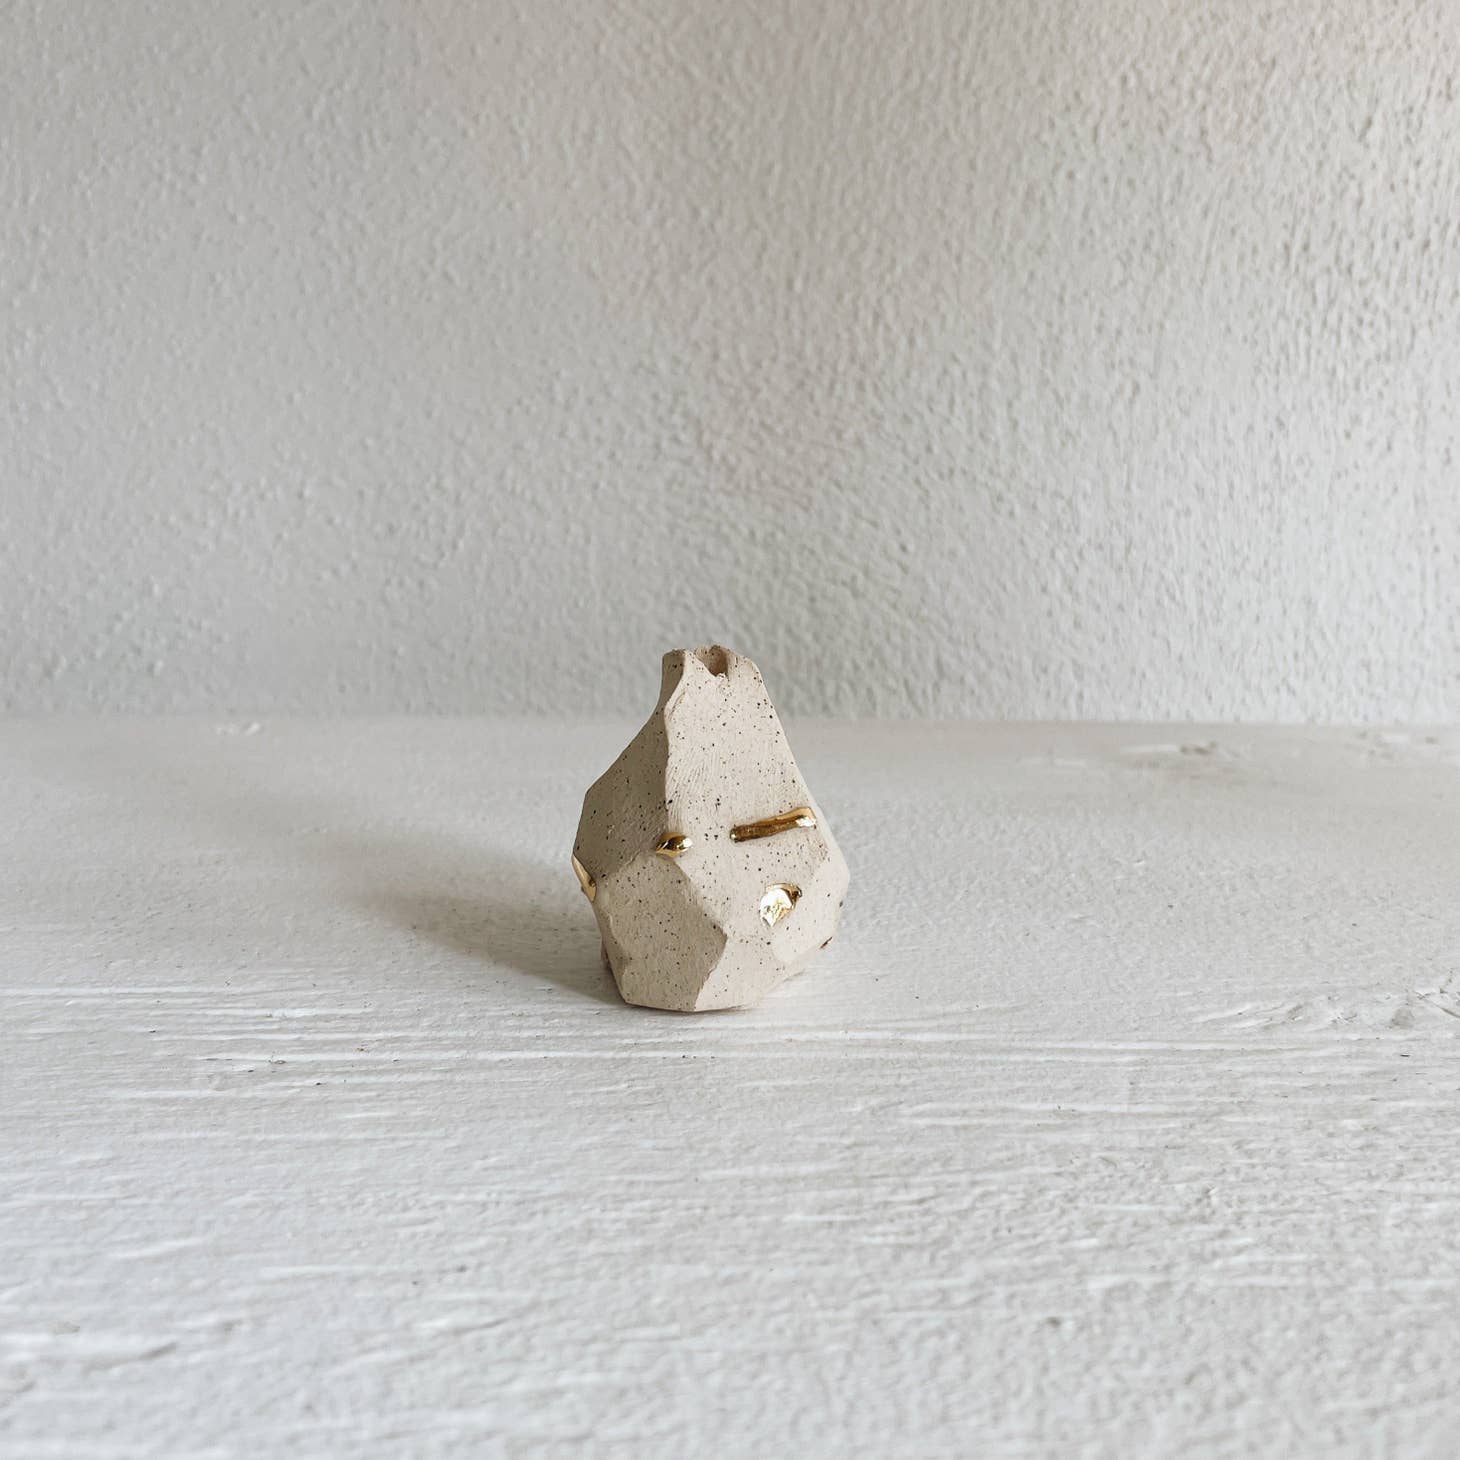 A small, hand-sculpted incense holder, carved and shaped into a small mountain shape.  Made from various types of clay, some that are mixed and marbled together and some that are highlighted with gold accents around the edges.